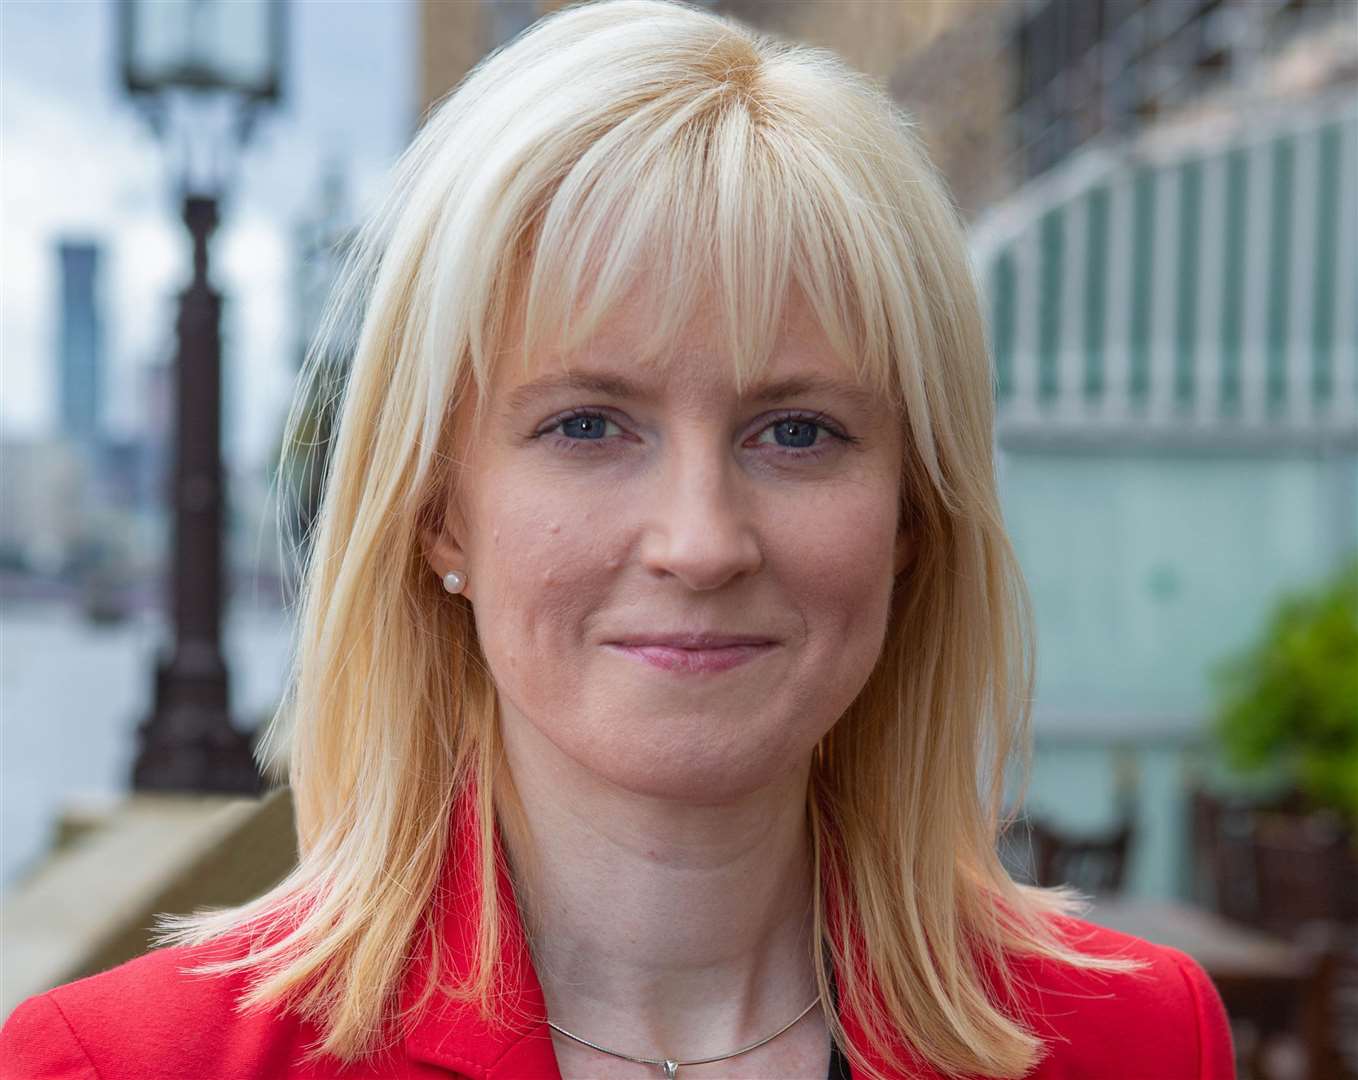 Labour MP Rosie Duffield says staff have been pushed to their limits